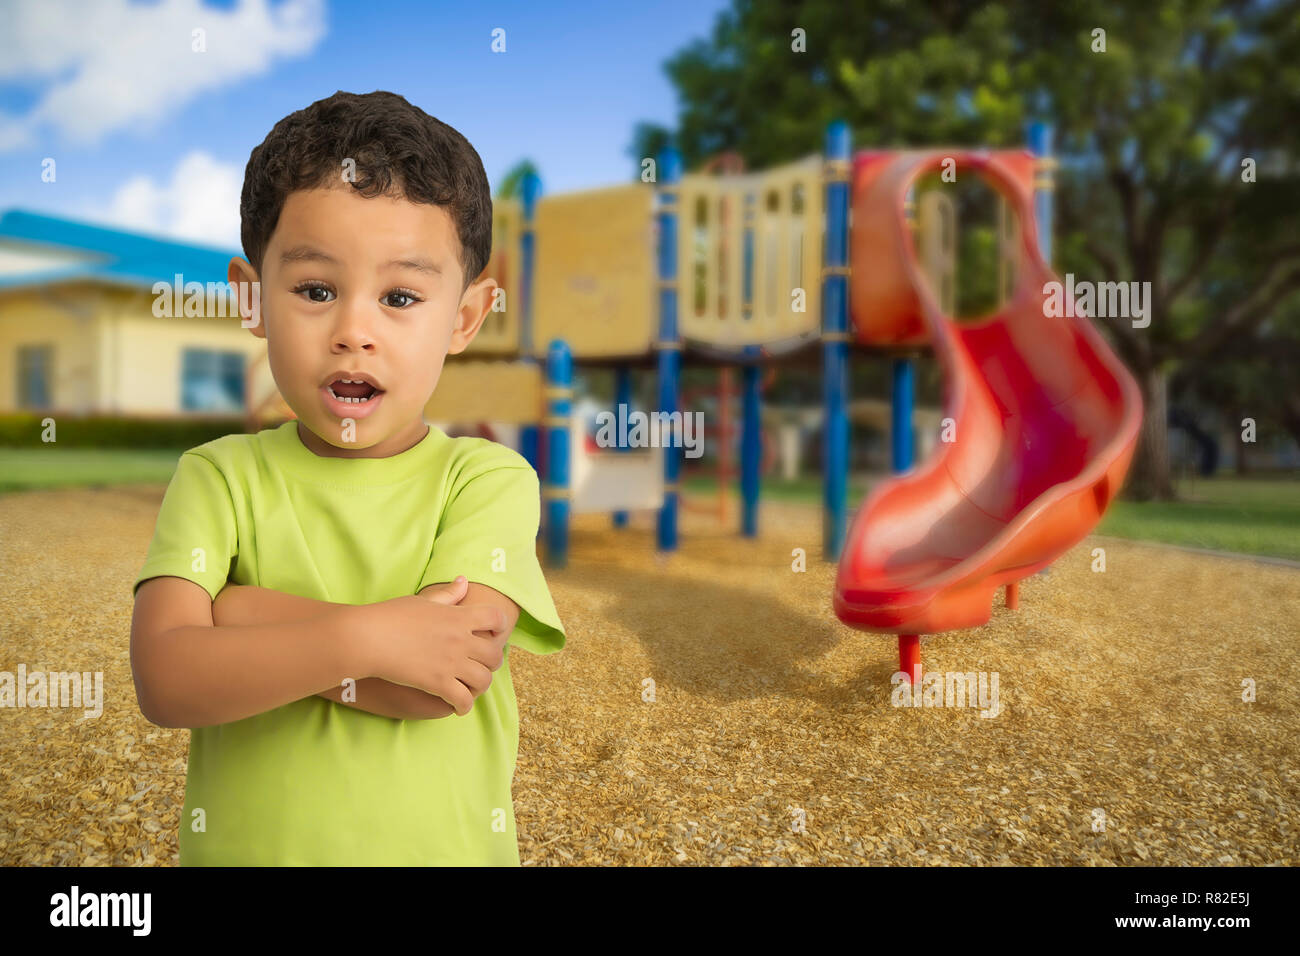 The boy in a green shirt looks at the camera debating to go on the slide. A boy with arms crossed looks at the camera on a nice day at the playground. Stock Photo